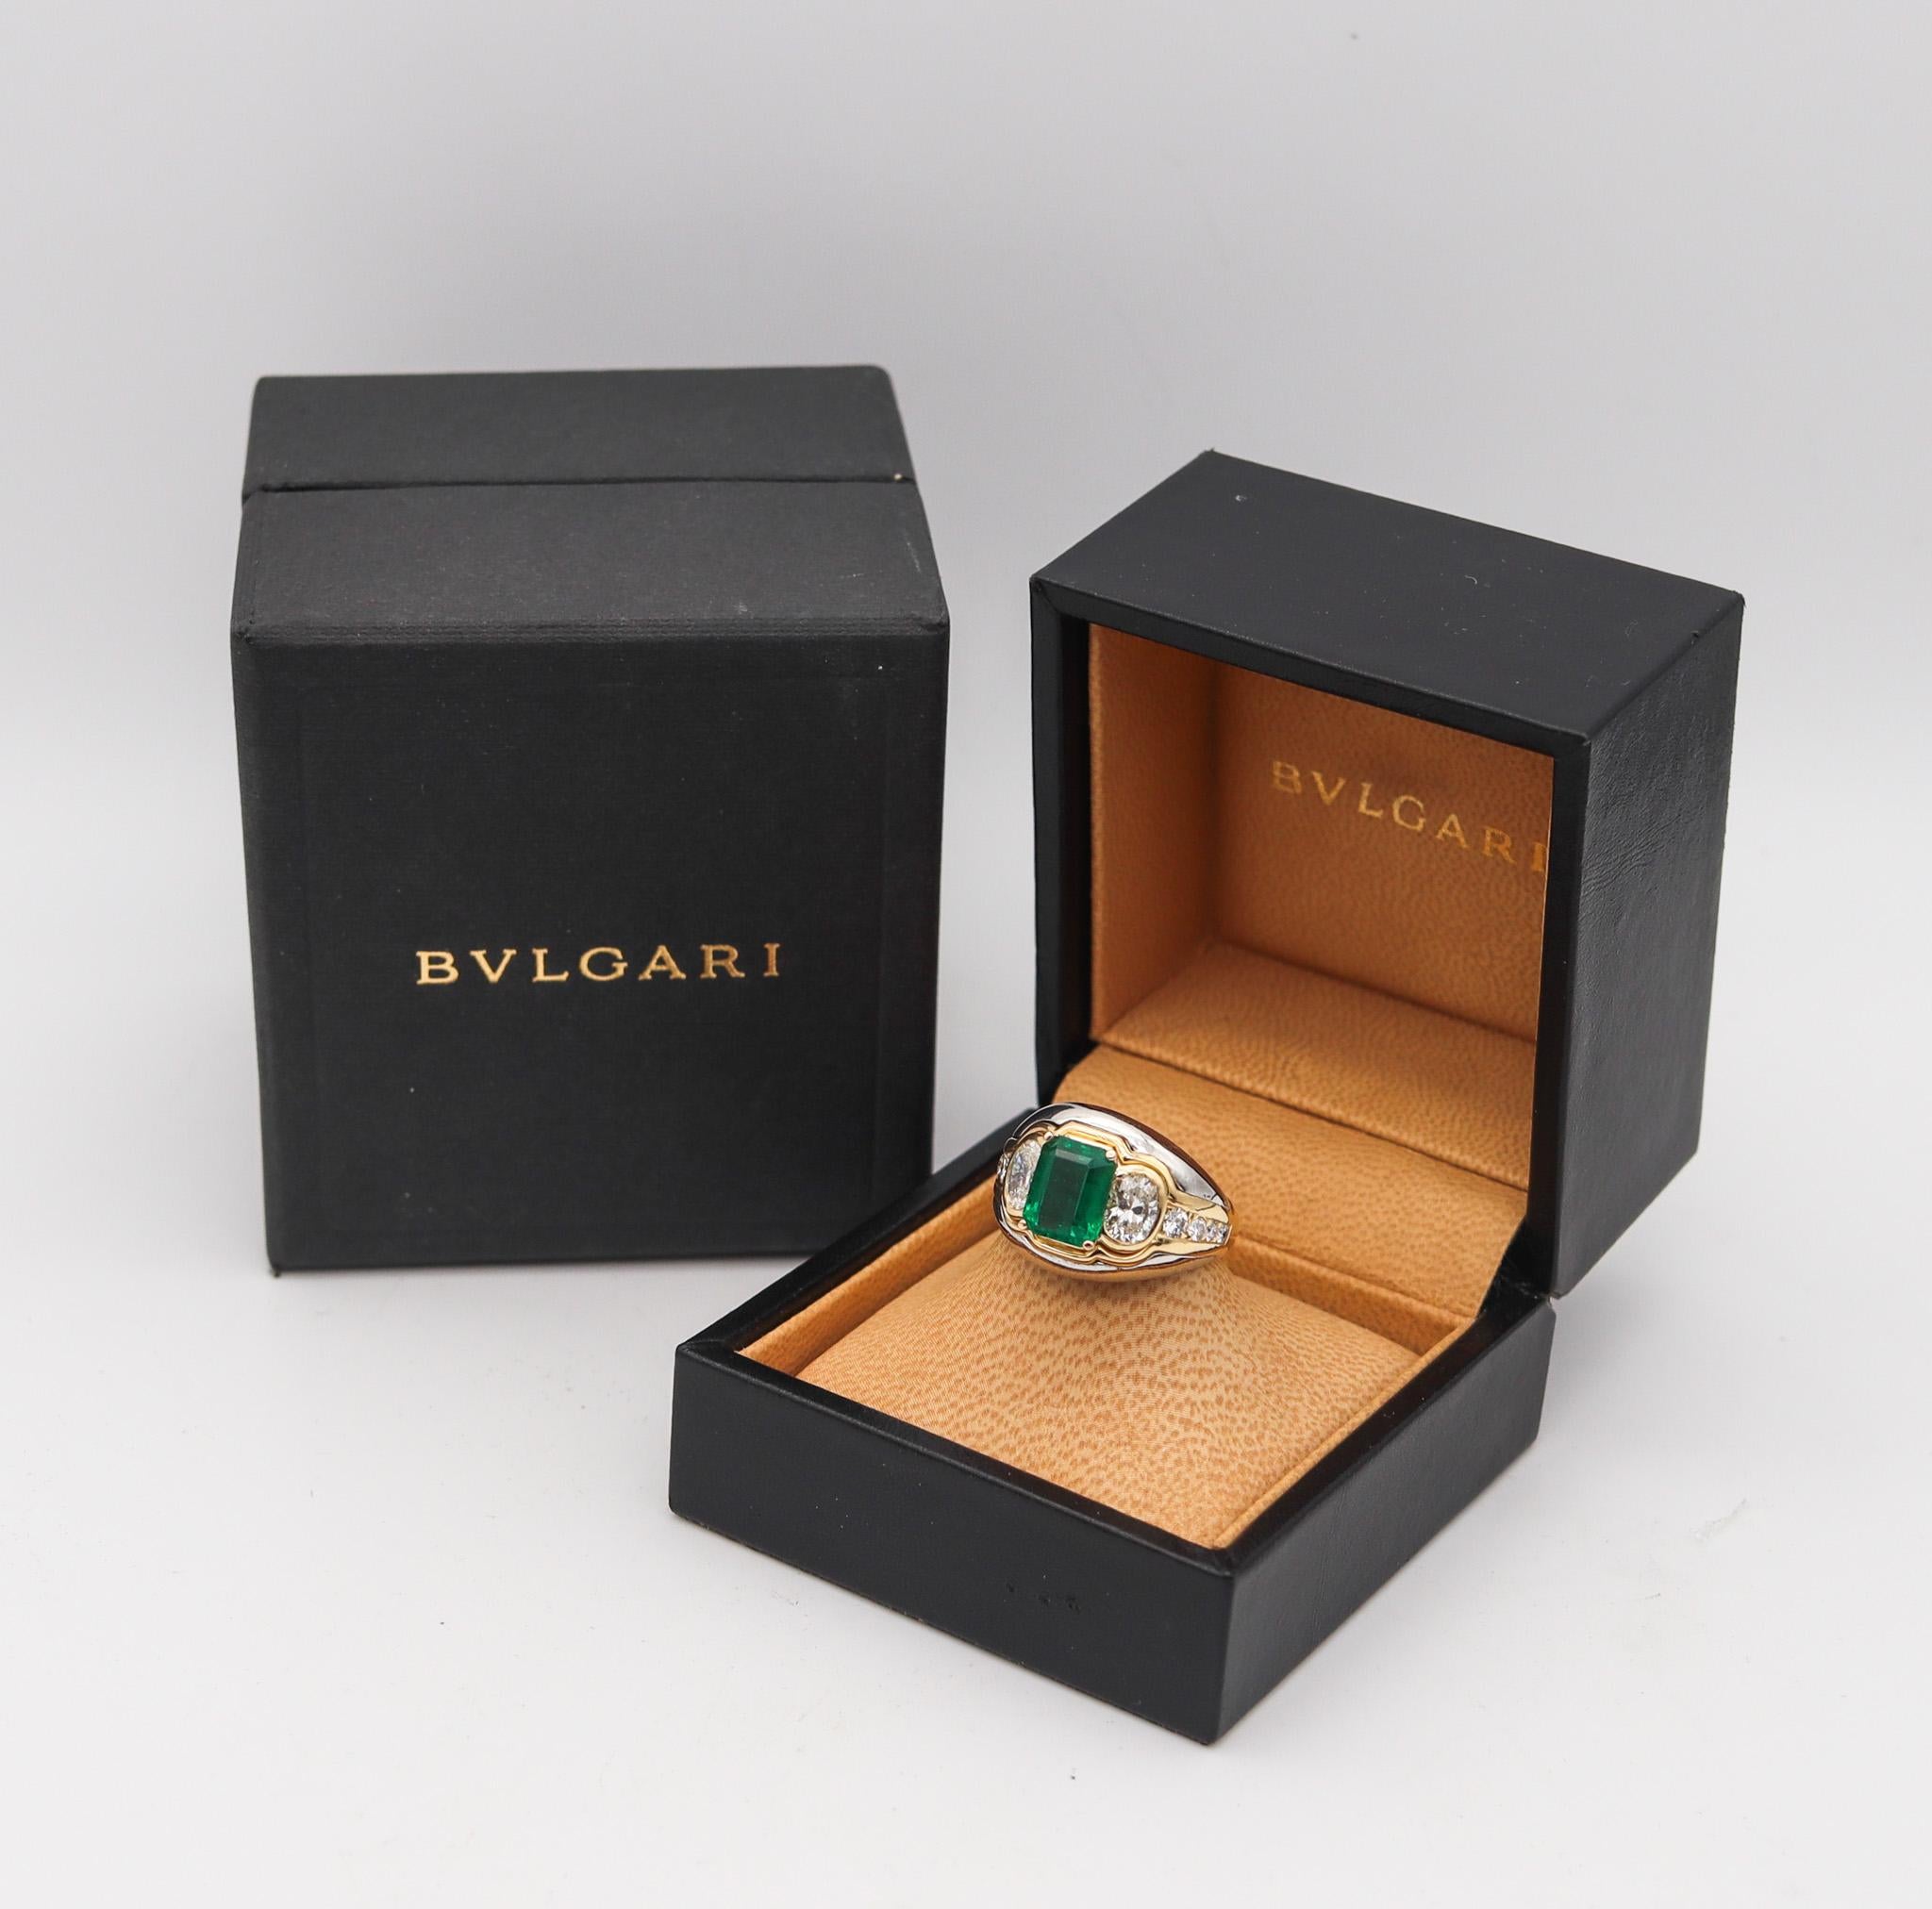 A gem-set cocktail ring designed by Bvlgari.

An exceptional piece of jewelry, created in Rome Italy by the iconic jewelry house of Bvlgari. This rare cocktail ring is part of the Bvlgari Prestige Collection and was carefully crafted with great